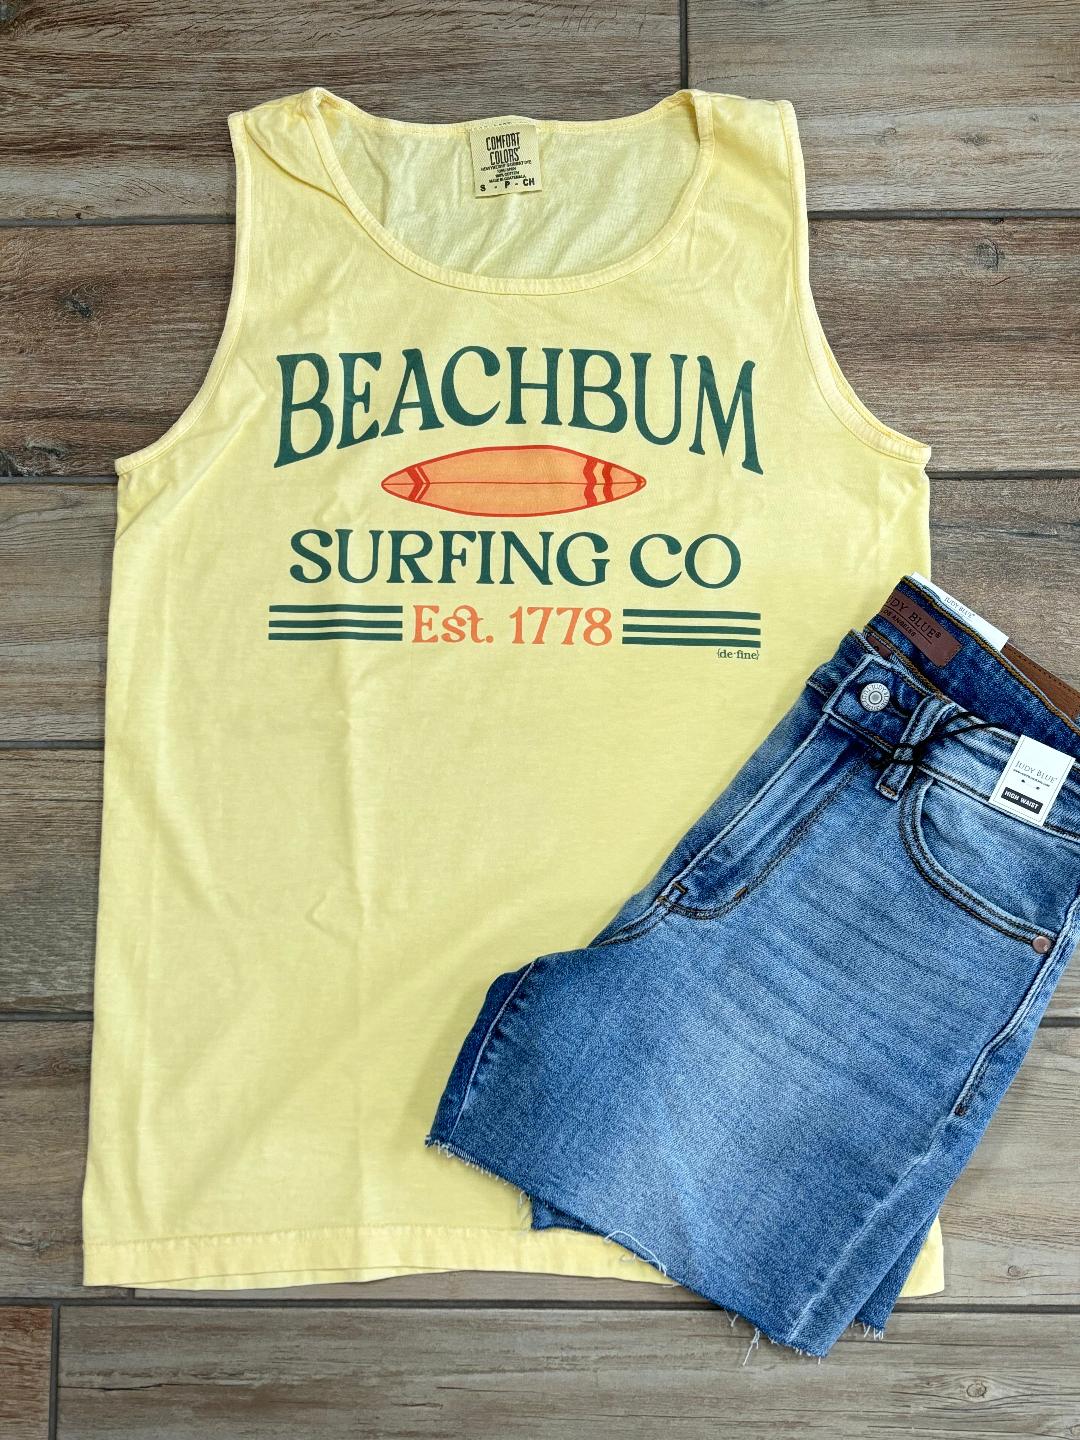 Beach Bum Surfing Co. Graphic Tee and Tank